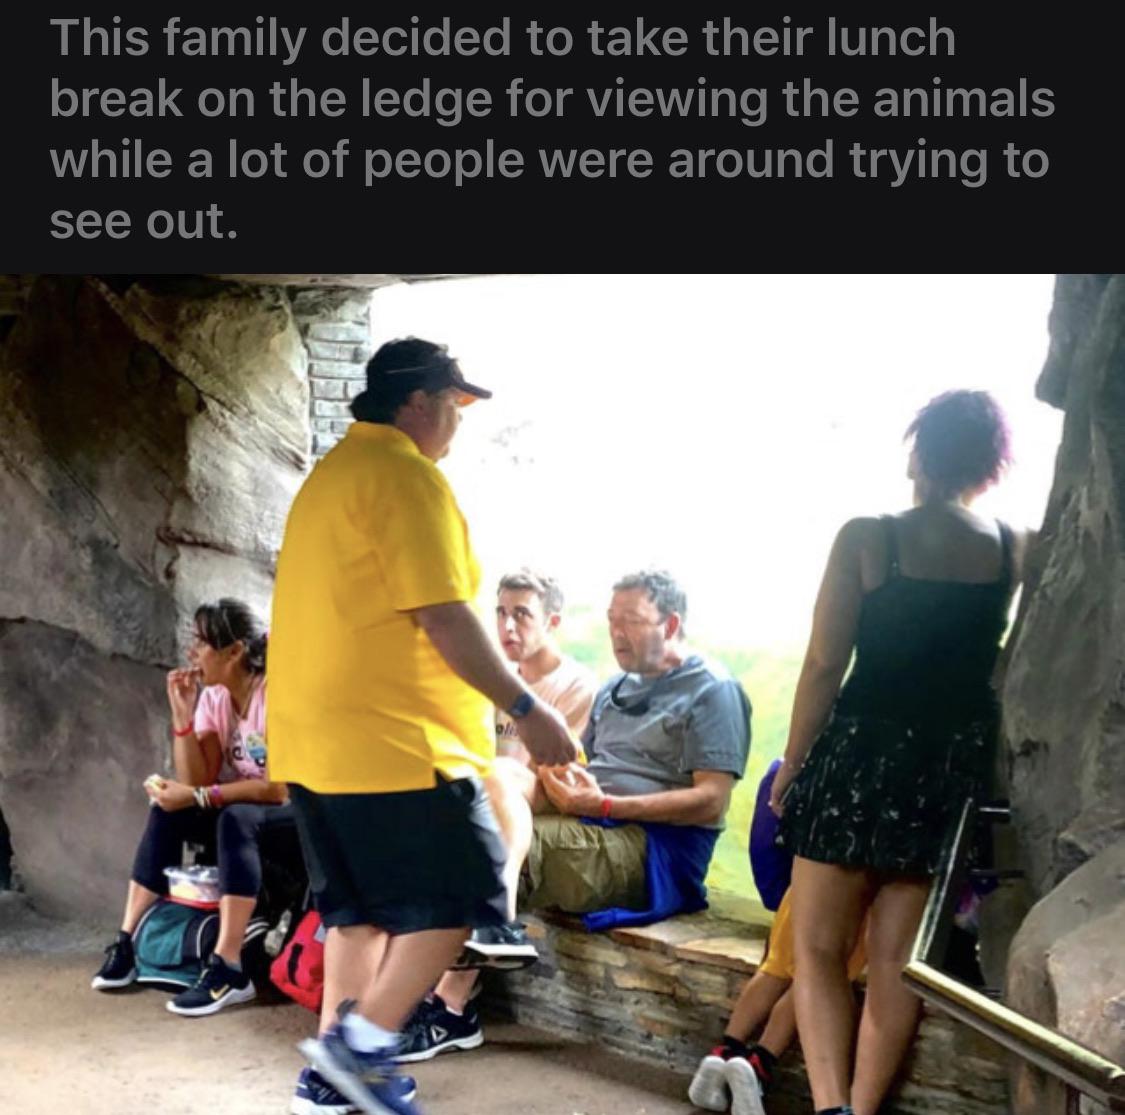 community - This family decided to take their lunch break on the ledge for viewing the animals while a lot of people were around trying to see out.